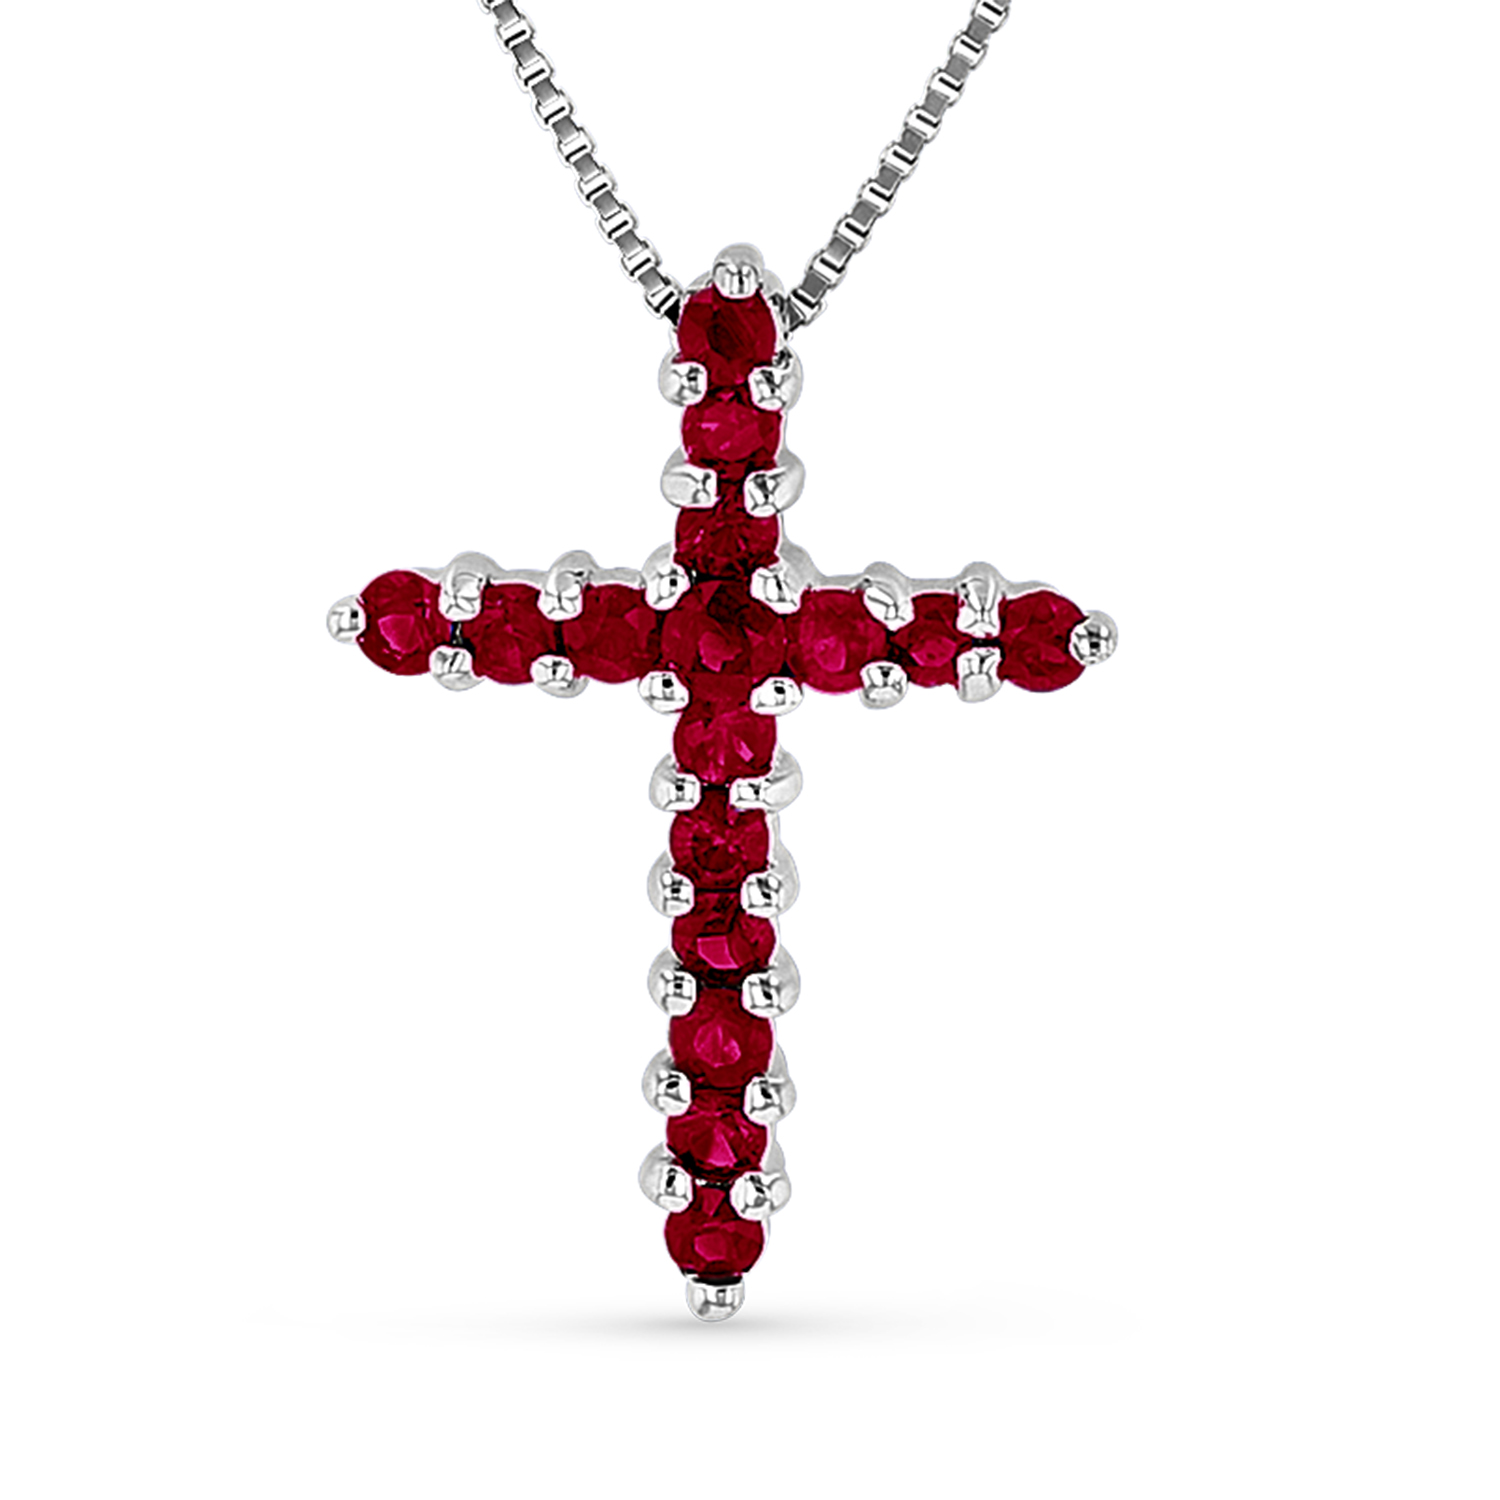 View 0.32ctw Ruby Cross Pendant in 14k White Gold